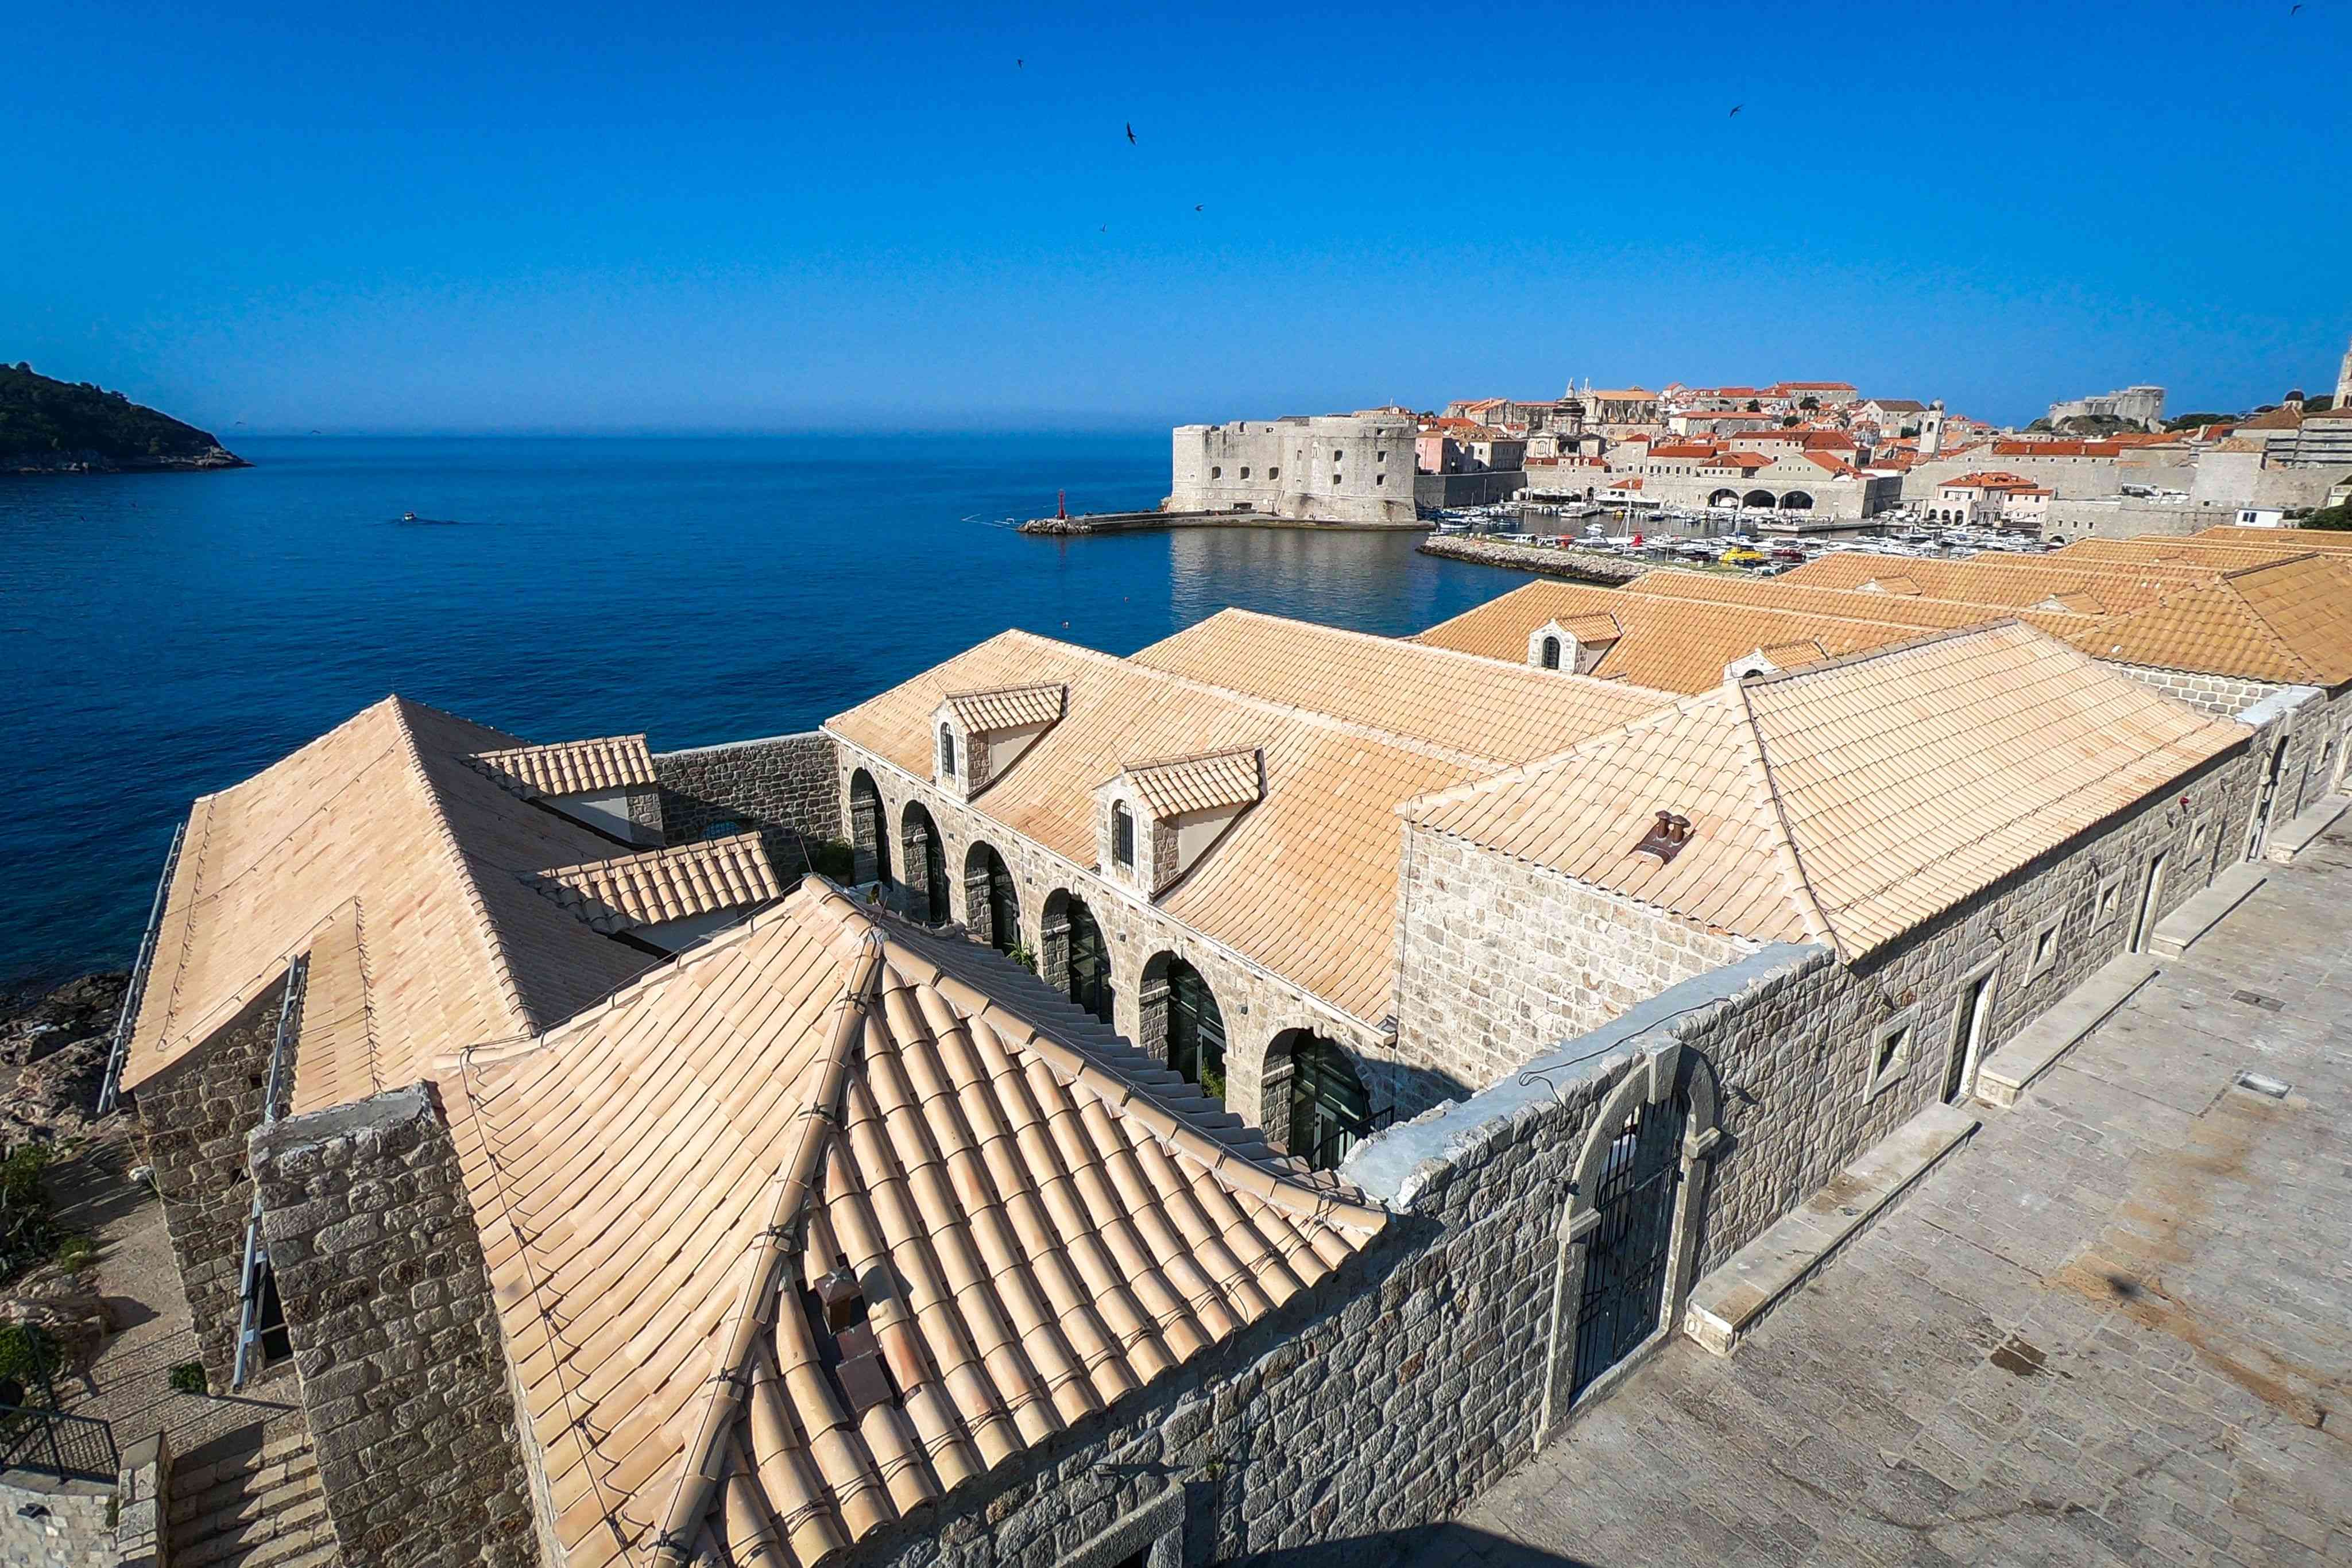 The Lazareti complex overlooking Dubrovnik’s harbour and old city ©Foto Nomad (2019)